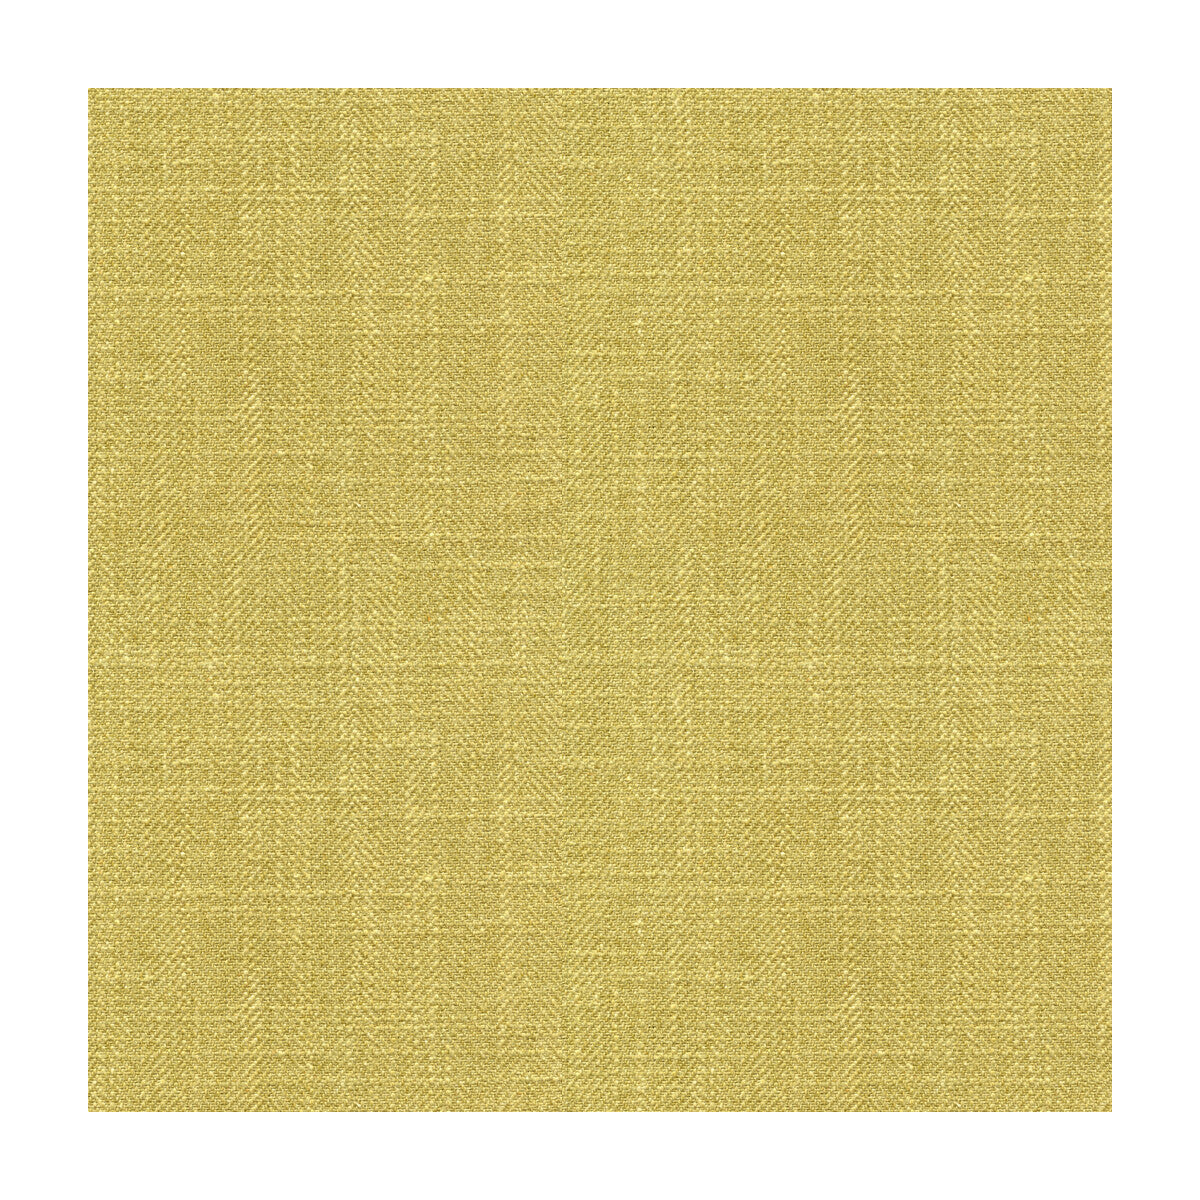 Kravet Basics fabric in 33842-130 color - pattern 33842.130.0 - by Kravet Basics in the Perfect Plains collection